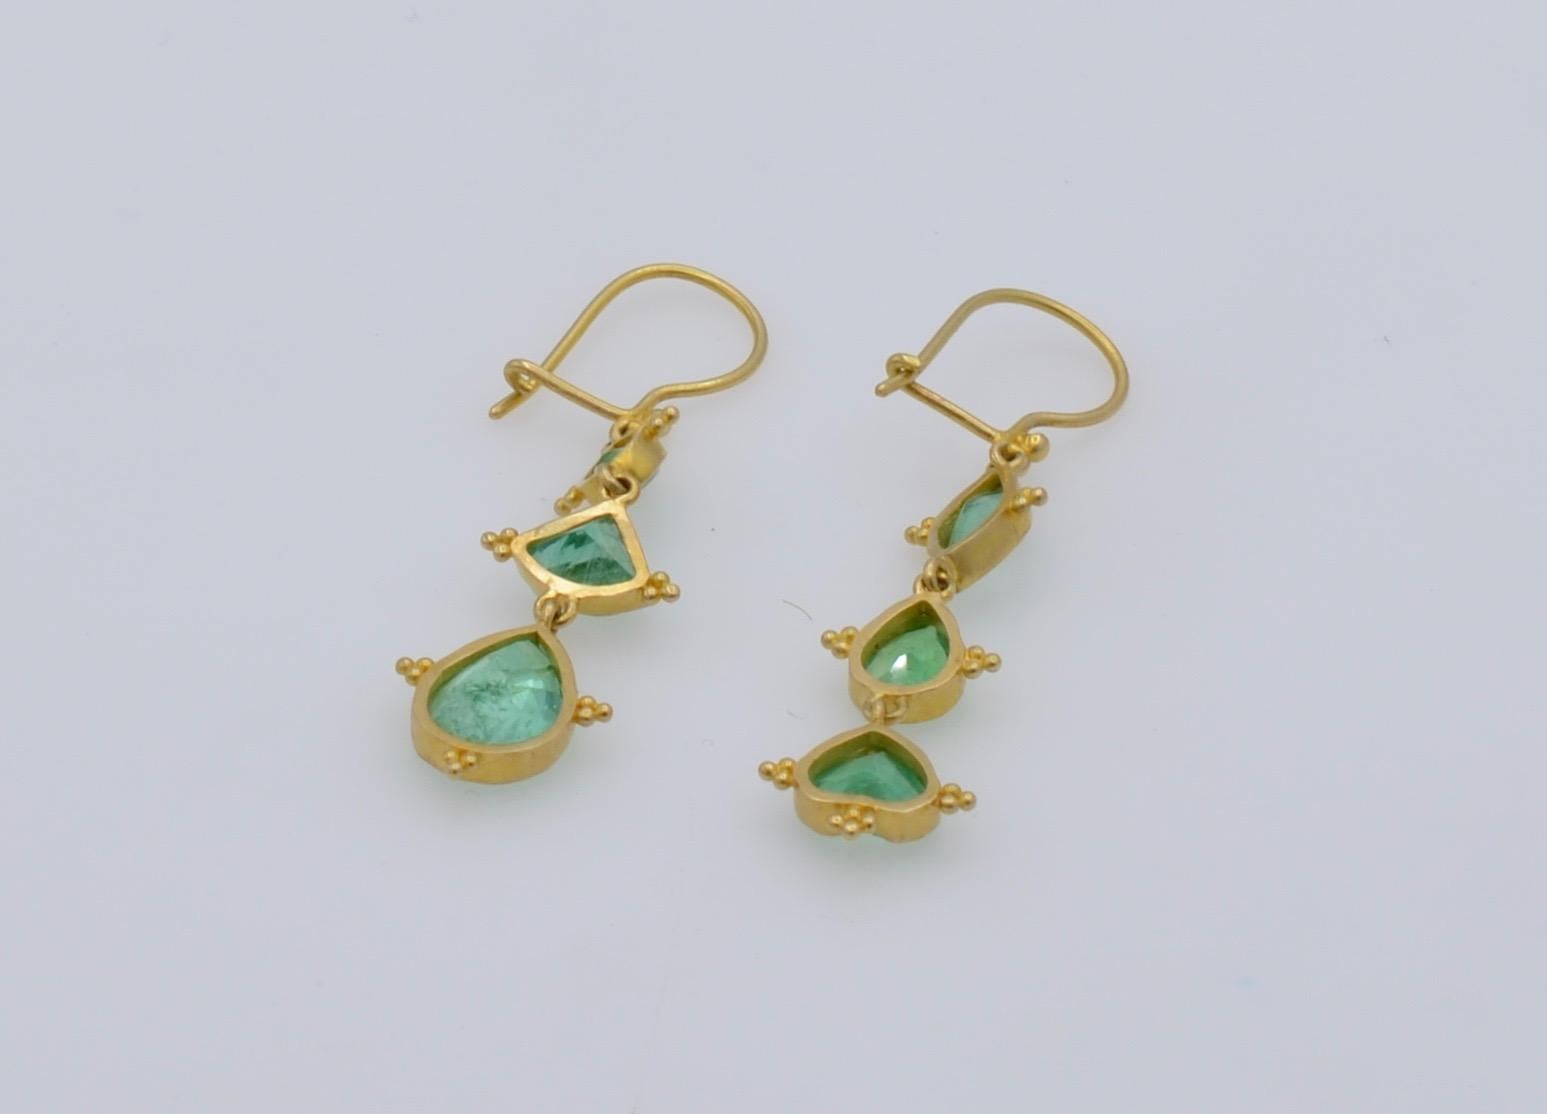 These artistic Steven Battelle designed asymmetrical emerald earrings hang in groups of three with marquise, pears, hearts and triangles set in 18K Yellow gold. The exquisite design and attention to detail create a beautiful one of a kind contrast